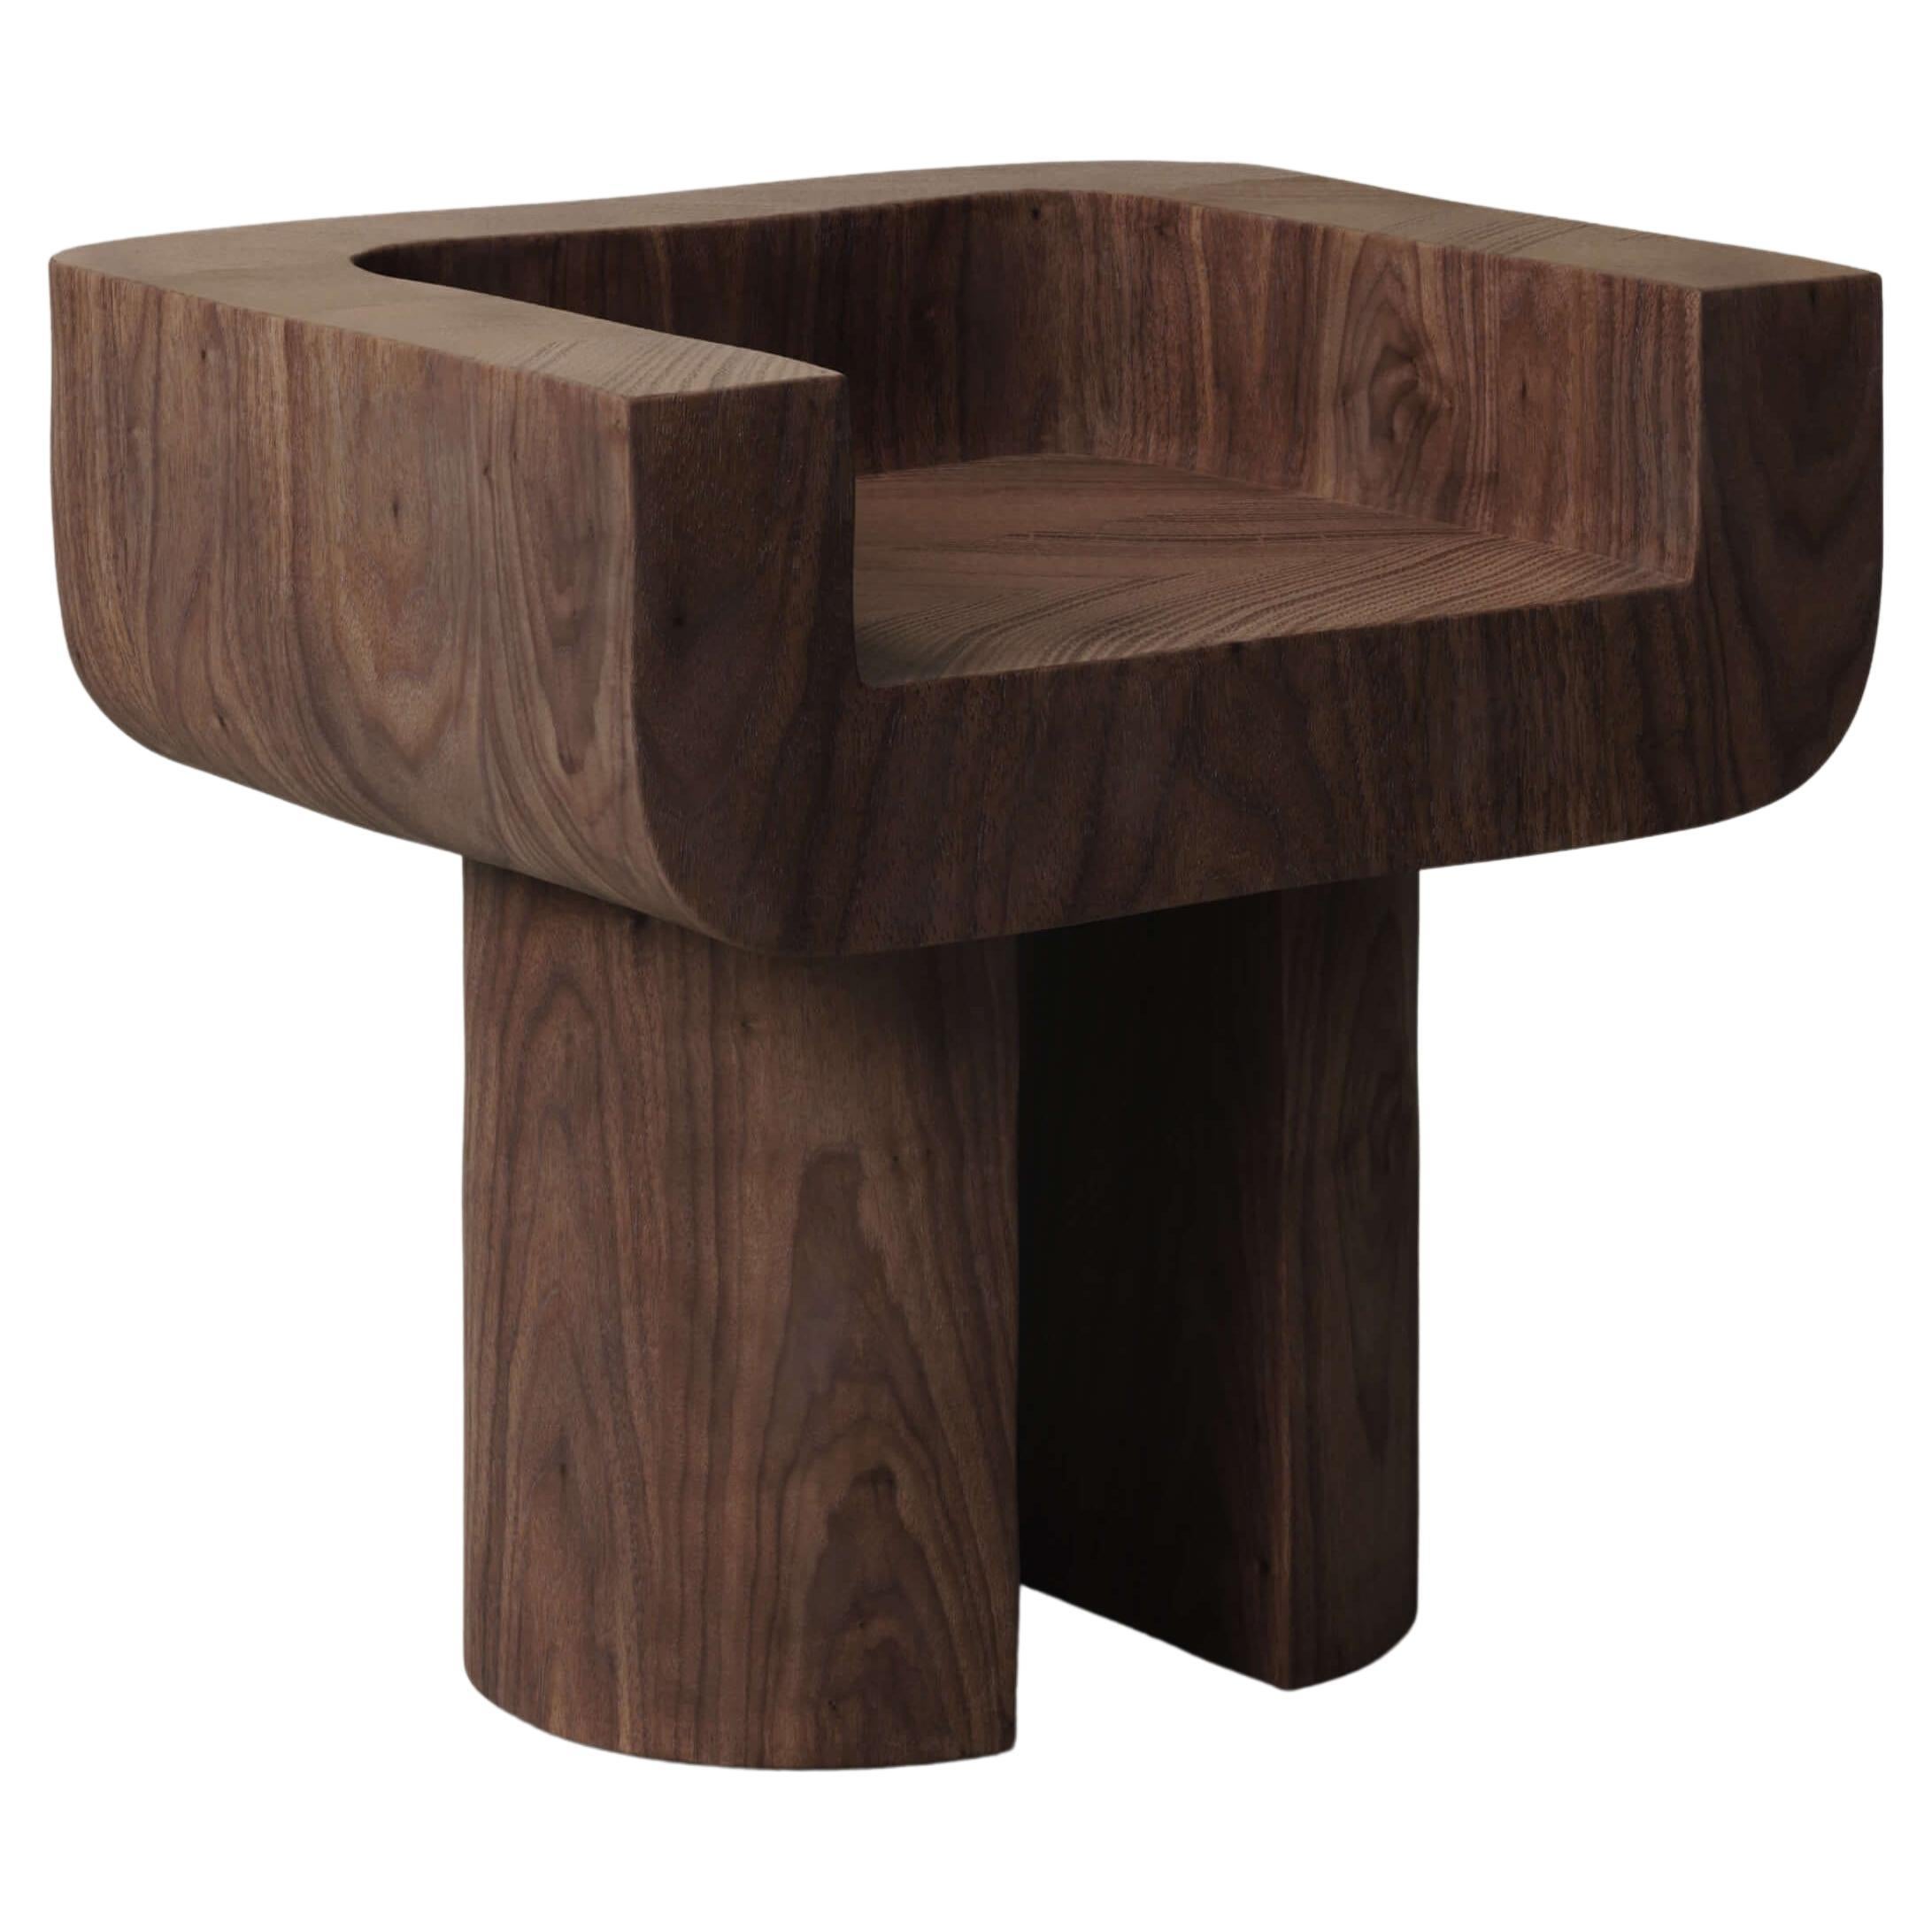 M_001 Chair by Monolith Studio, Walnut For Sale